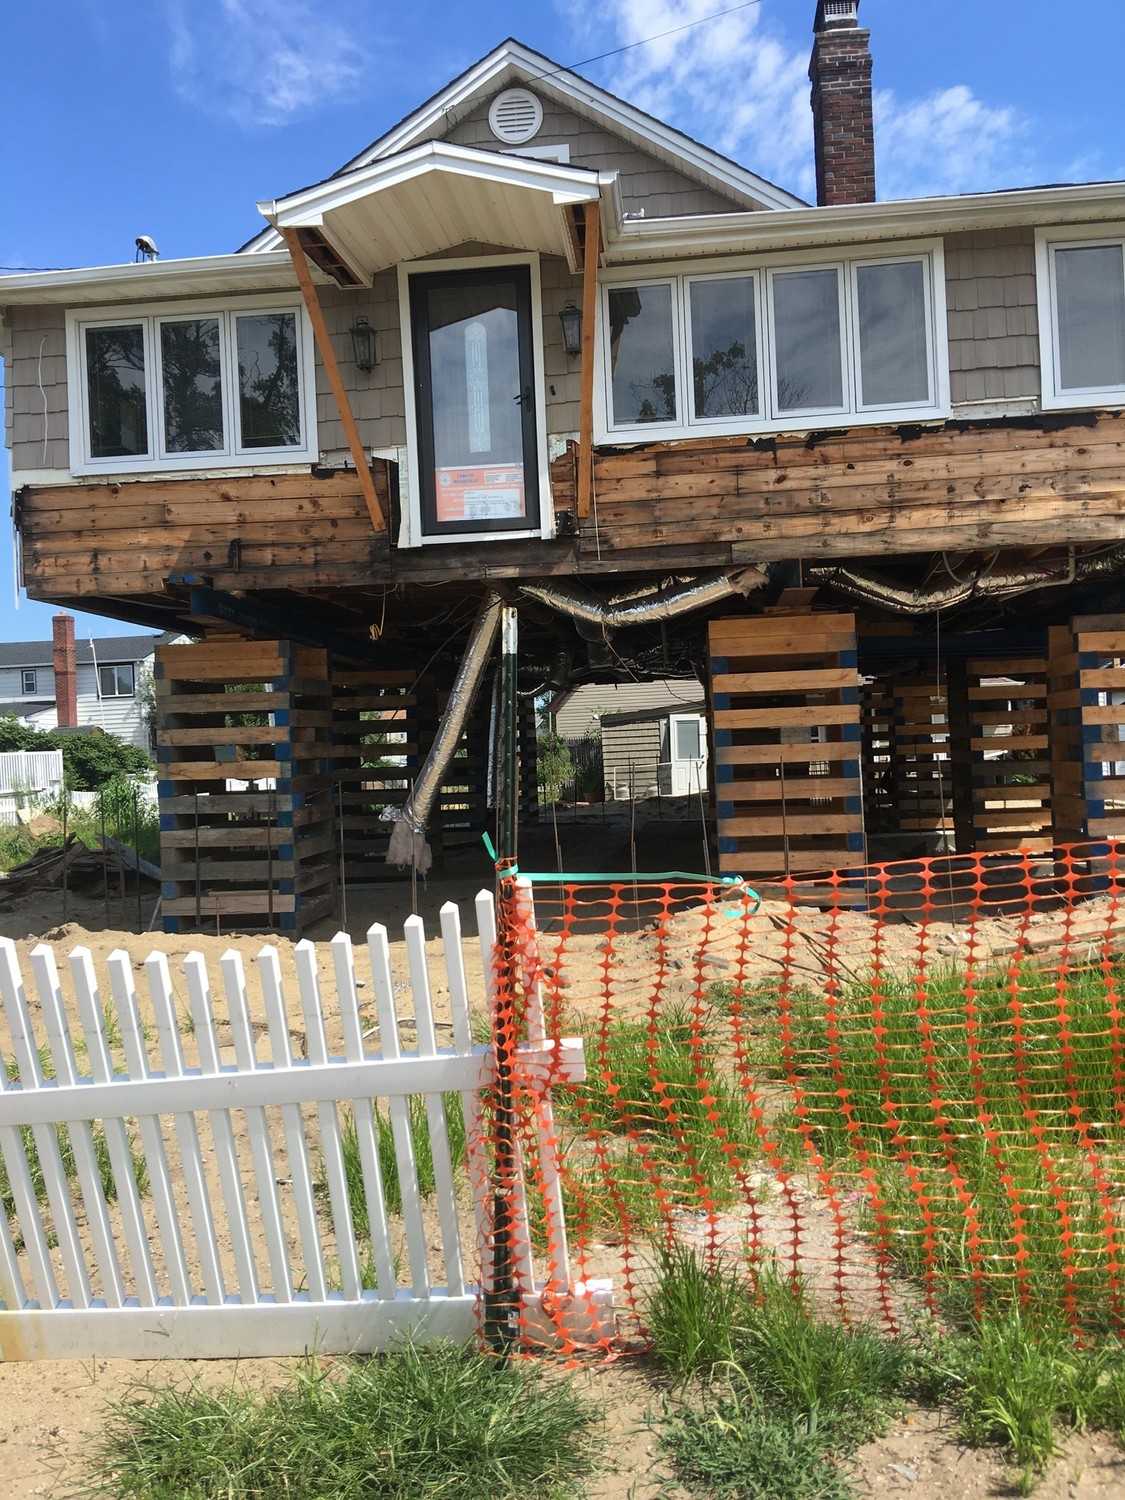 Donna Prisciandaro said that her Bay Park home was suspended in the air on stilts for 11 months after two contractors — one of whom was Lee Moser — took money from her to raise it and did not finish the job.